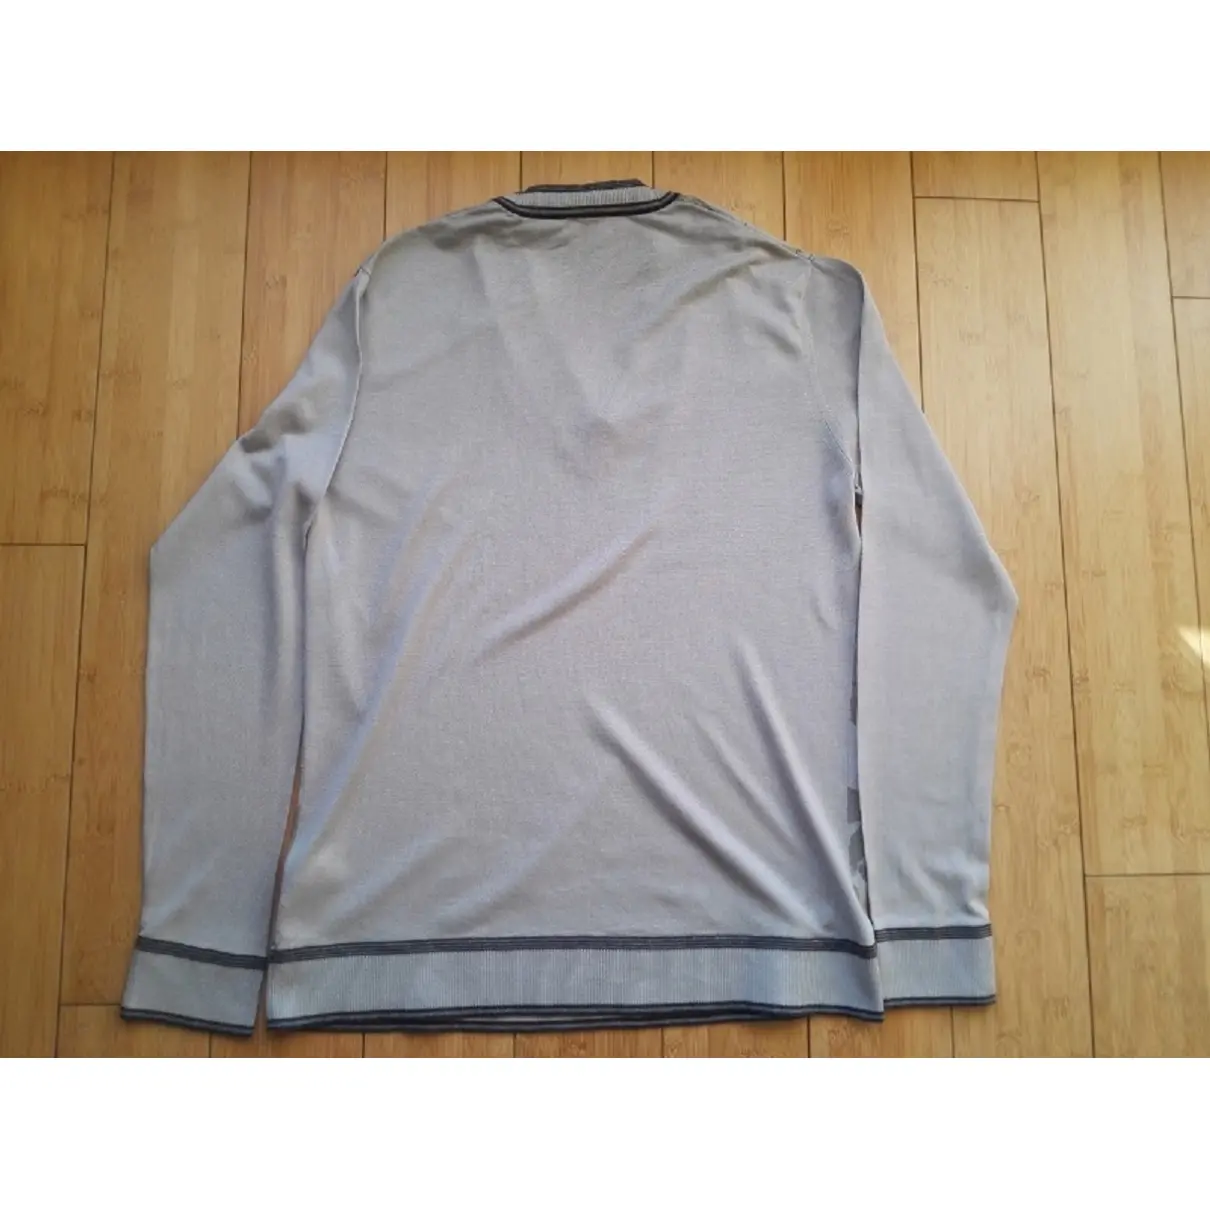 Kenzo Silk pull for sale - Vintage